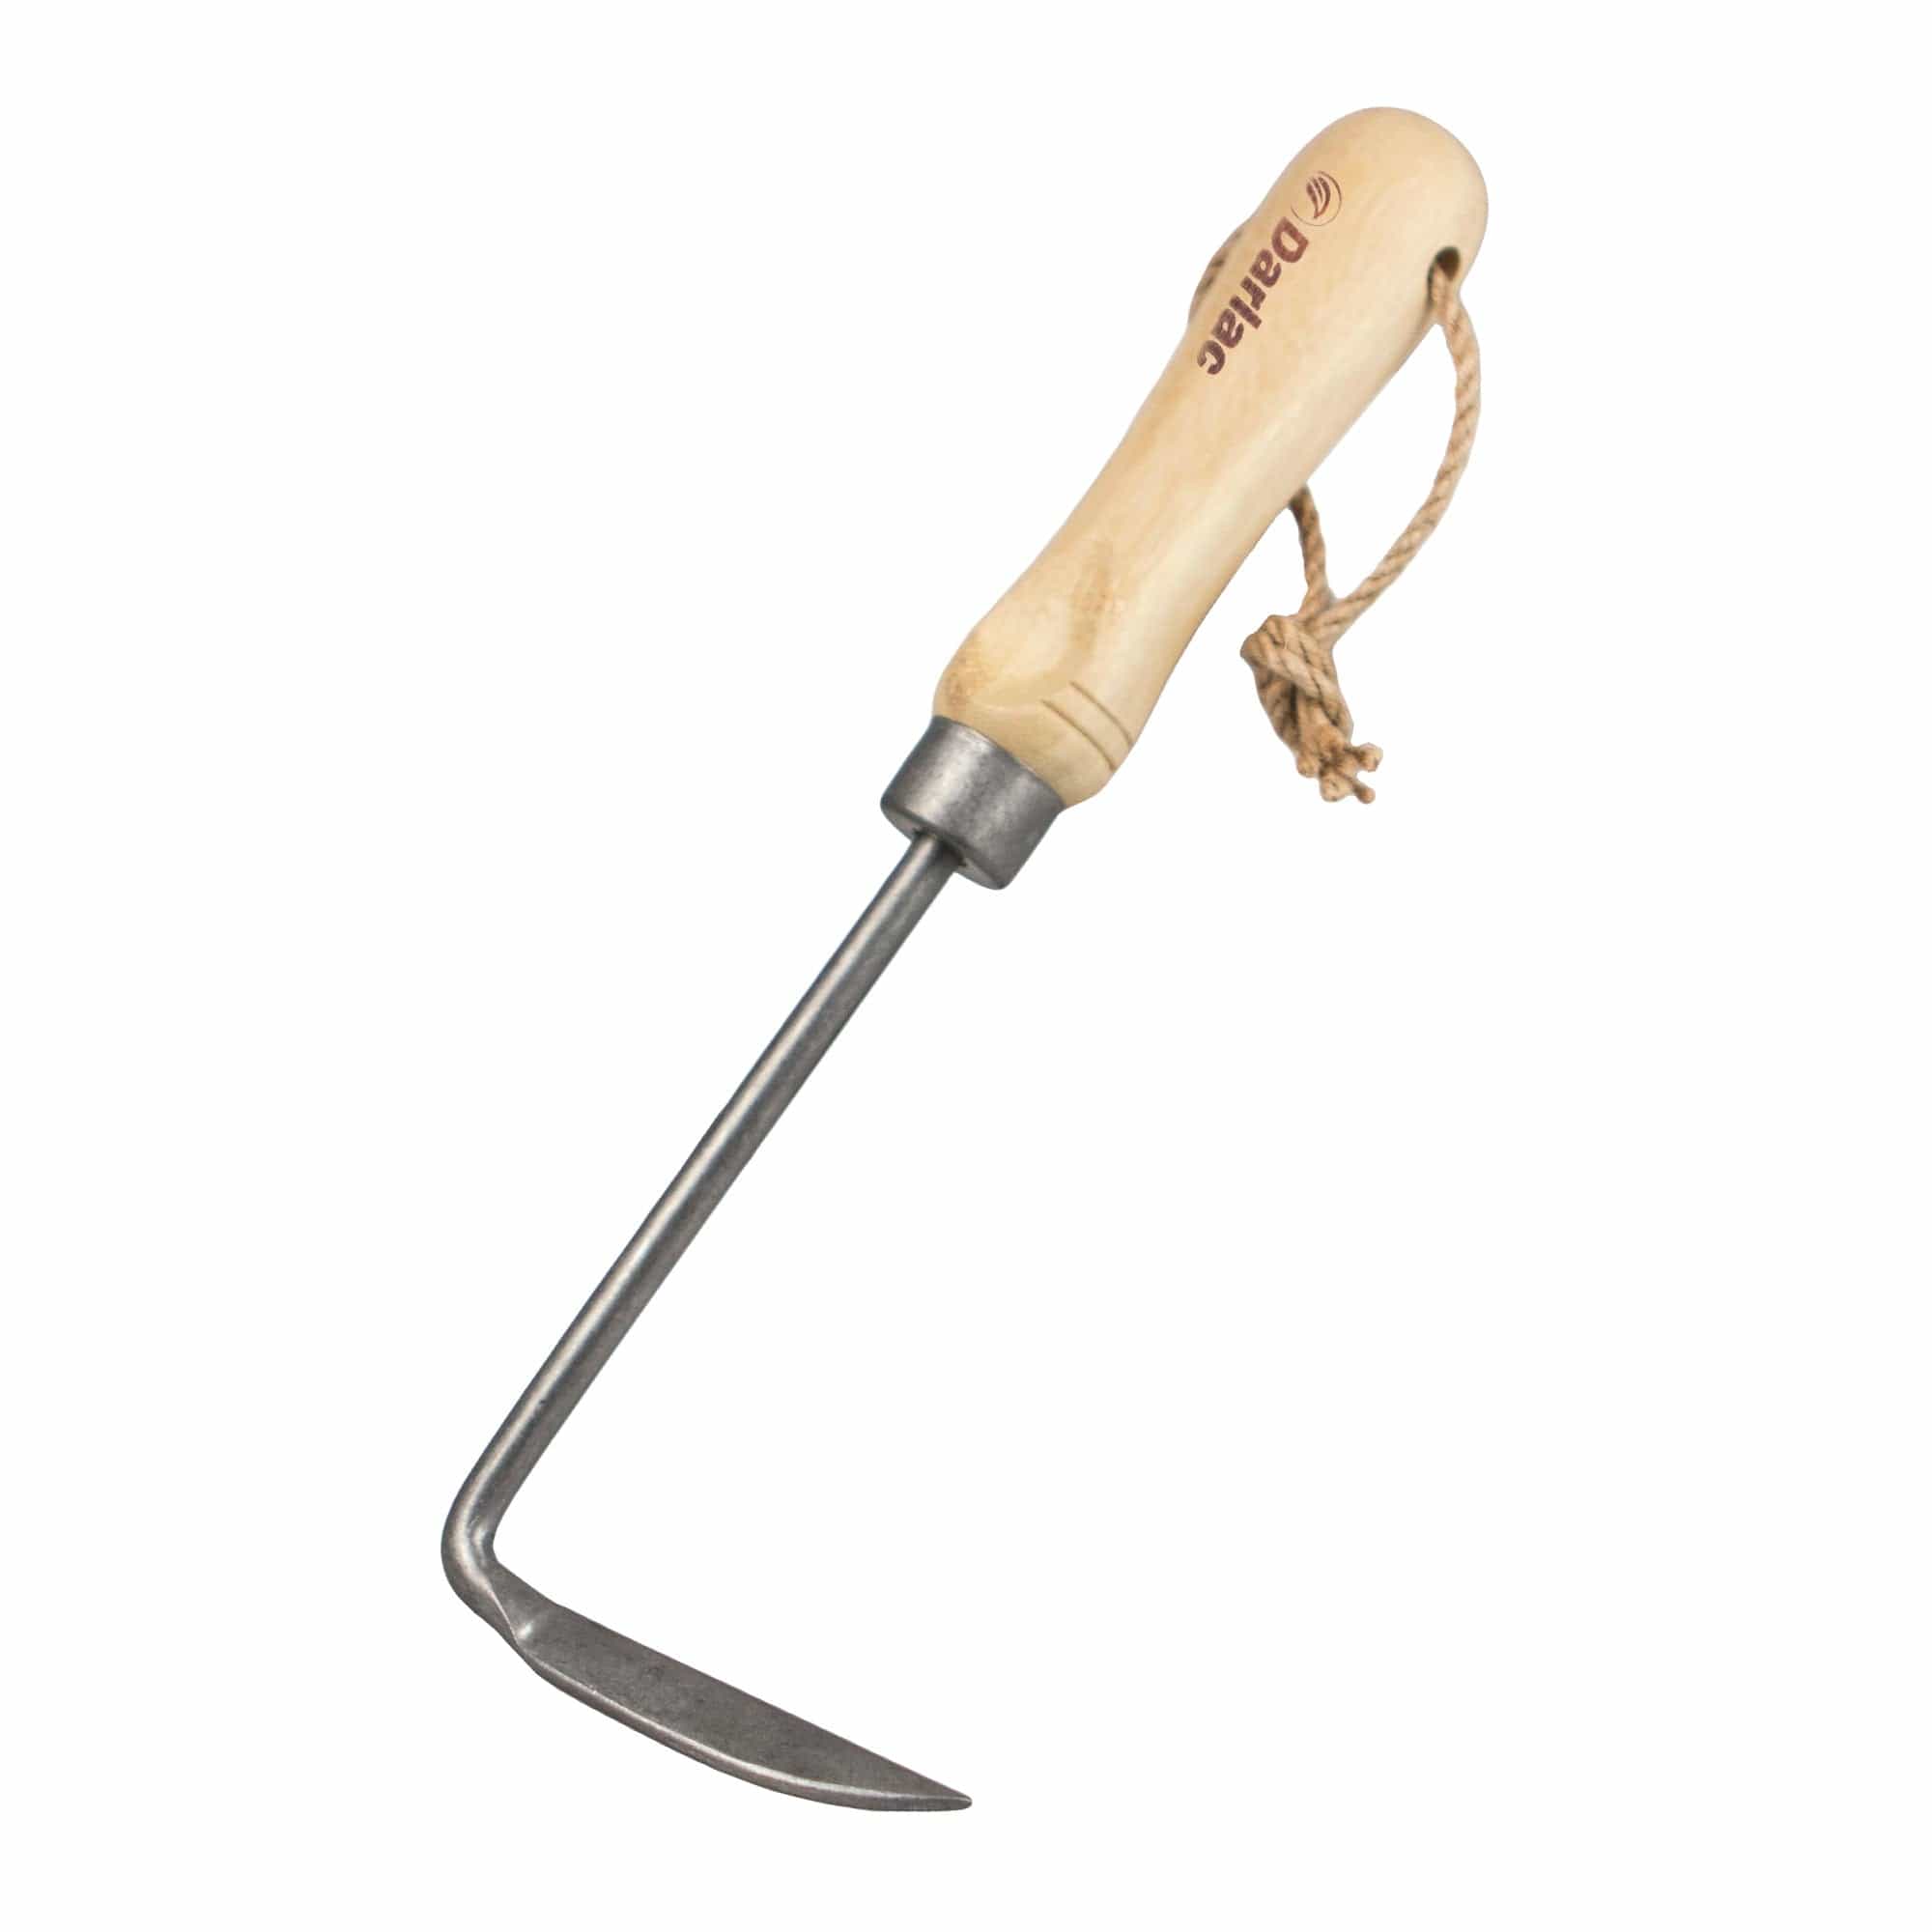 dt-brown HARDWARE Darlac Bamboo Cape Cod Weeder